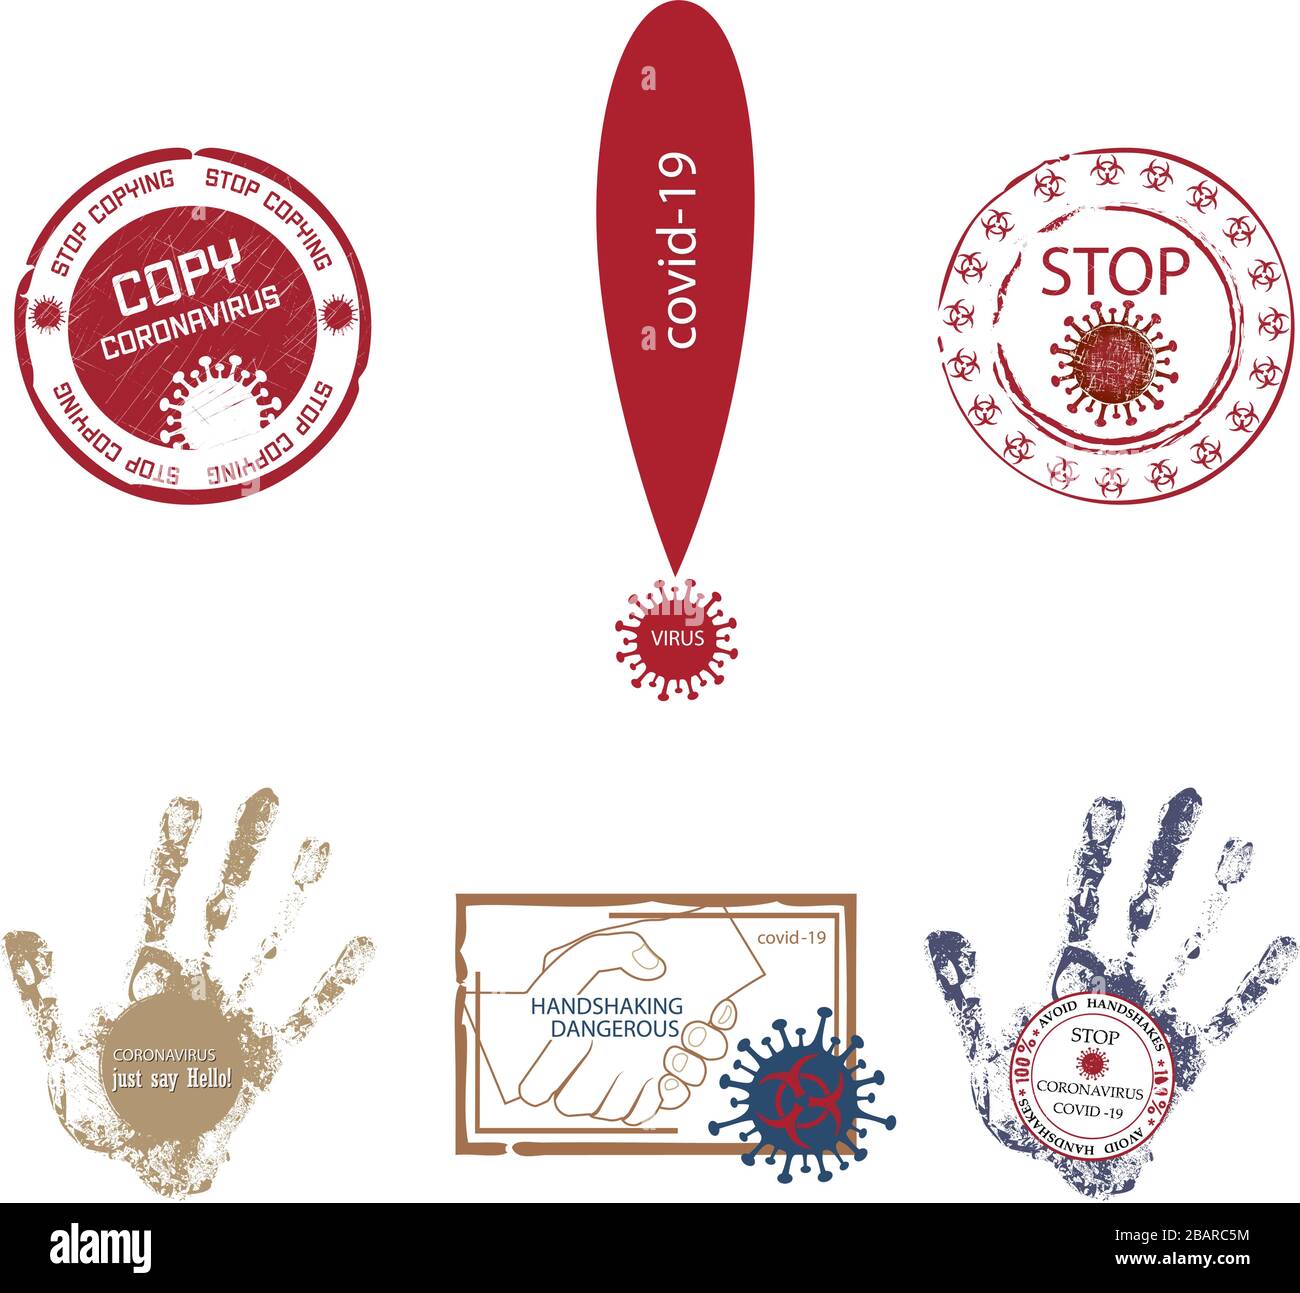 A set of stamps and icons on the theme of coronavirus. Warnings about danger, recommendations with text, refrain from shaking hands Stock Vector